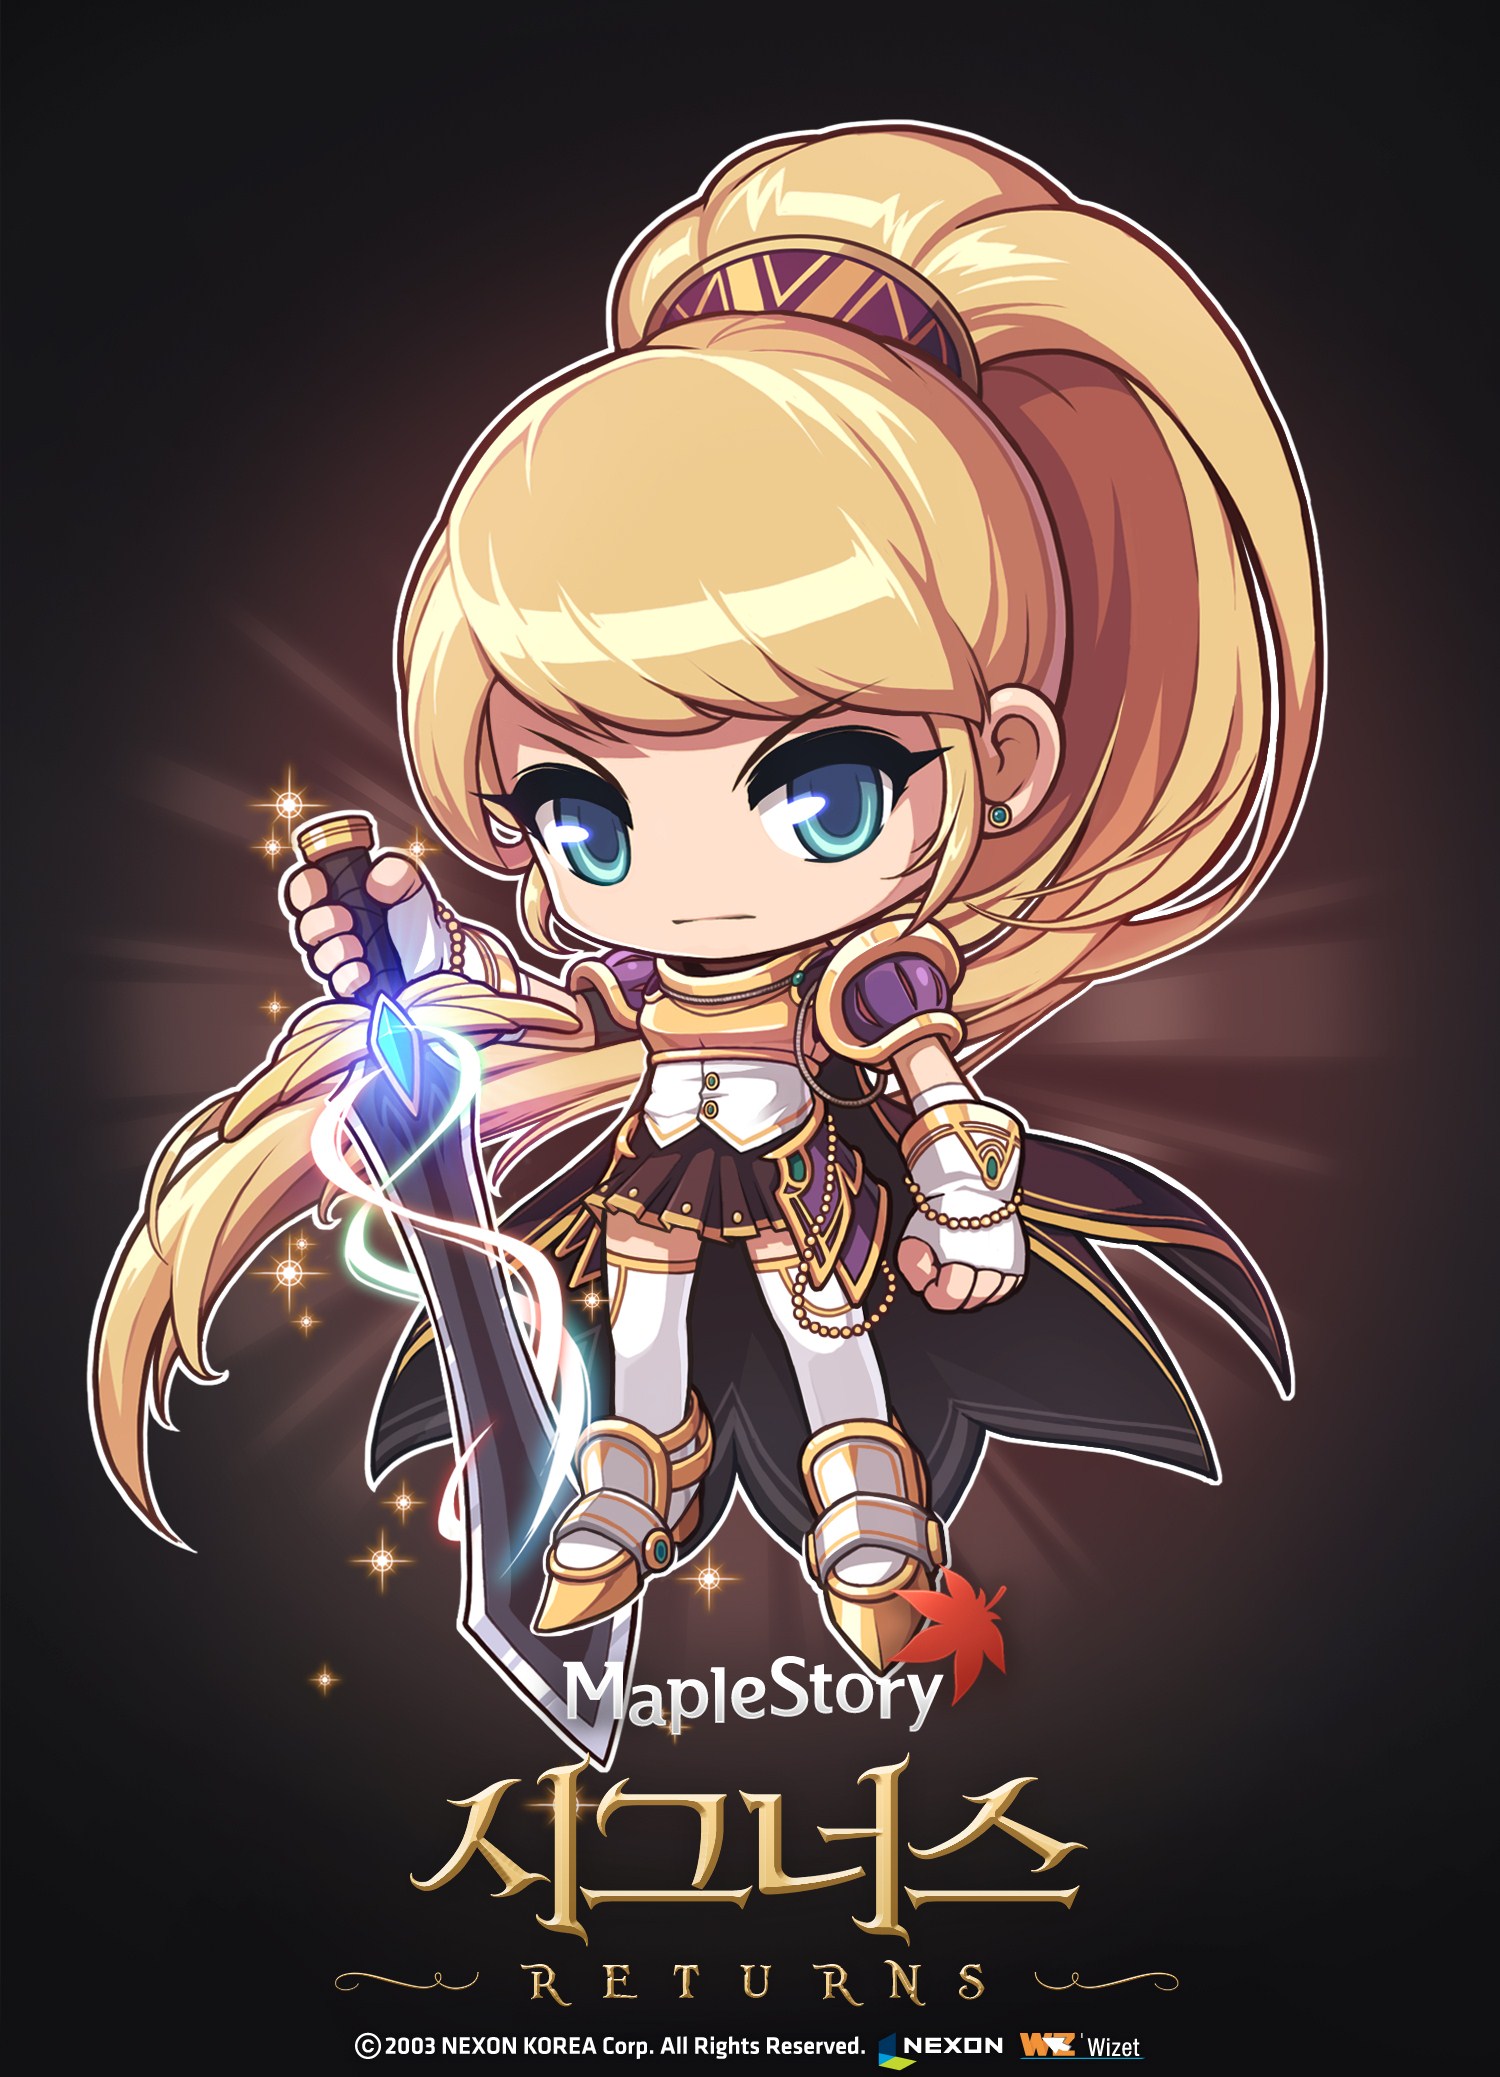 Maplestory mercedes potential power #5